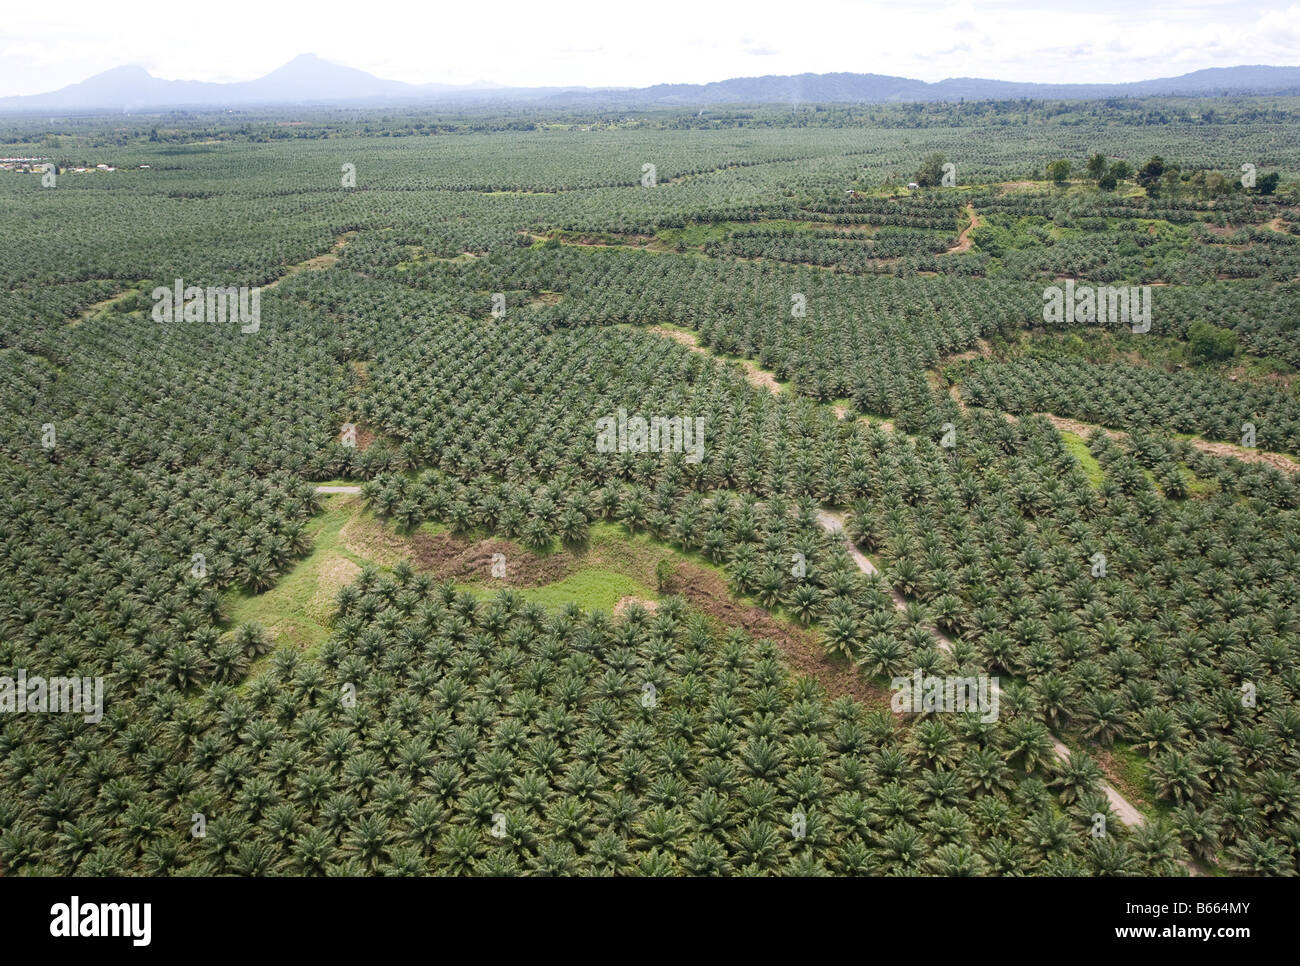 New Britain Oil Palm Limited palm plantation, near Kimbe, West New Britain Island, Papua New Guinea, Wednesday 24th September 20 Stock Photo